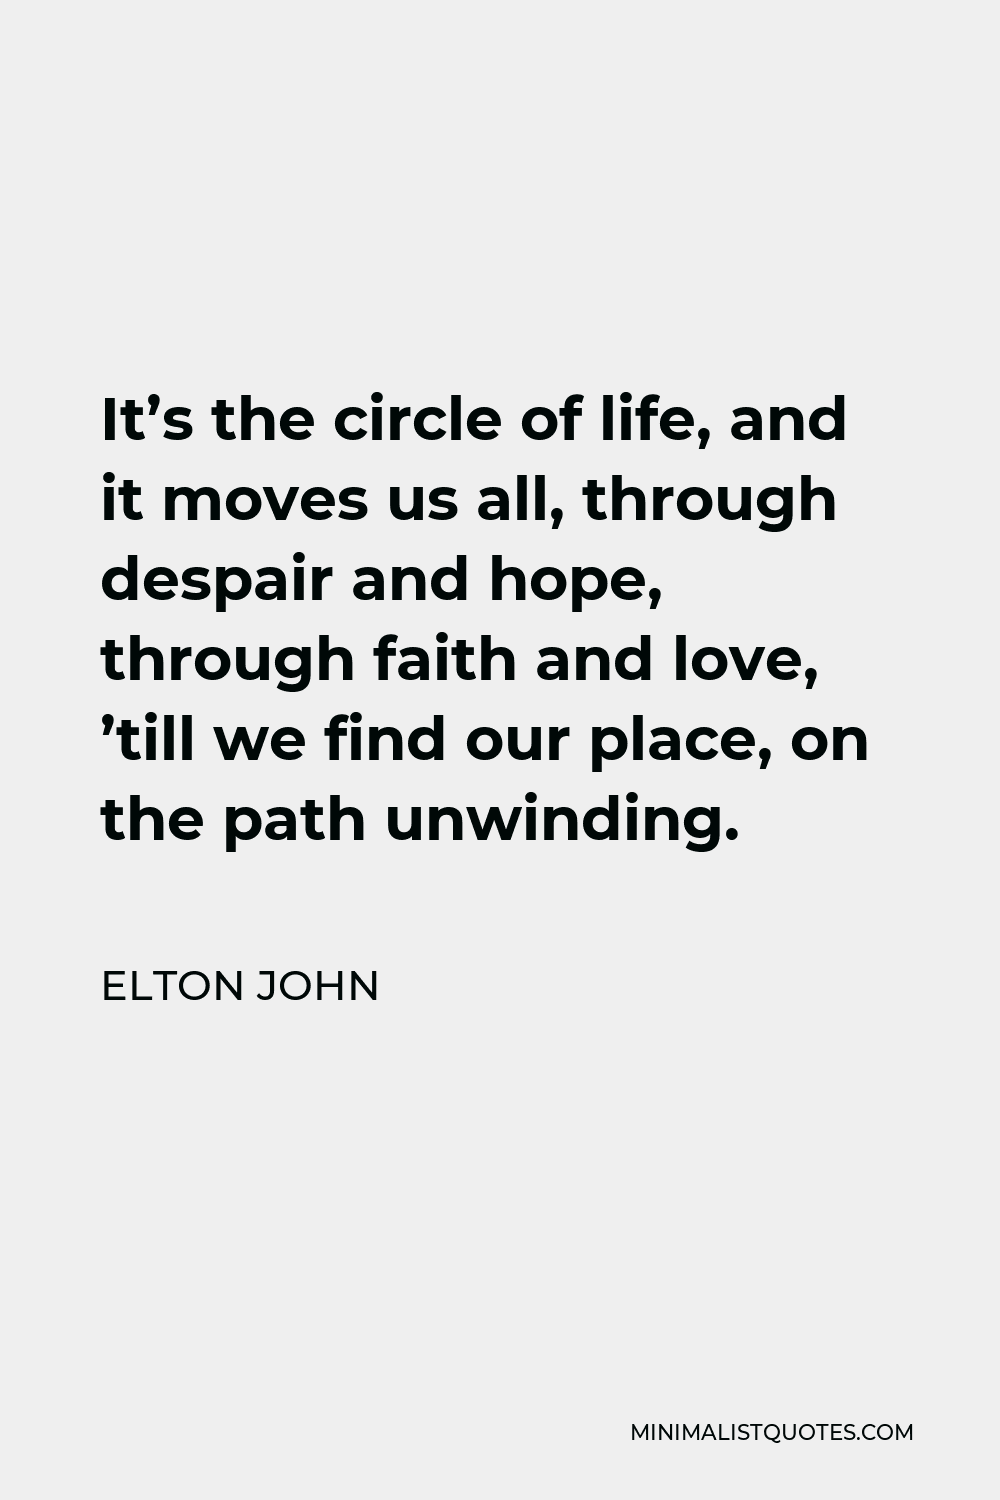 Elton John Quote - It’s the circle of life, and it moves us all, through despair and hope, through faith and love, ’till we find our place, on the path unwinding.